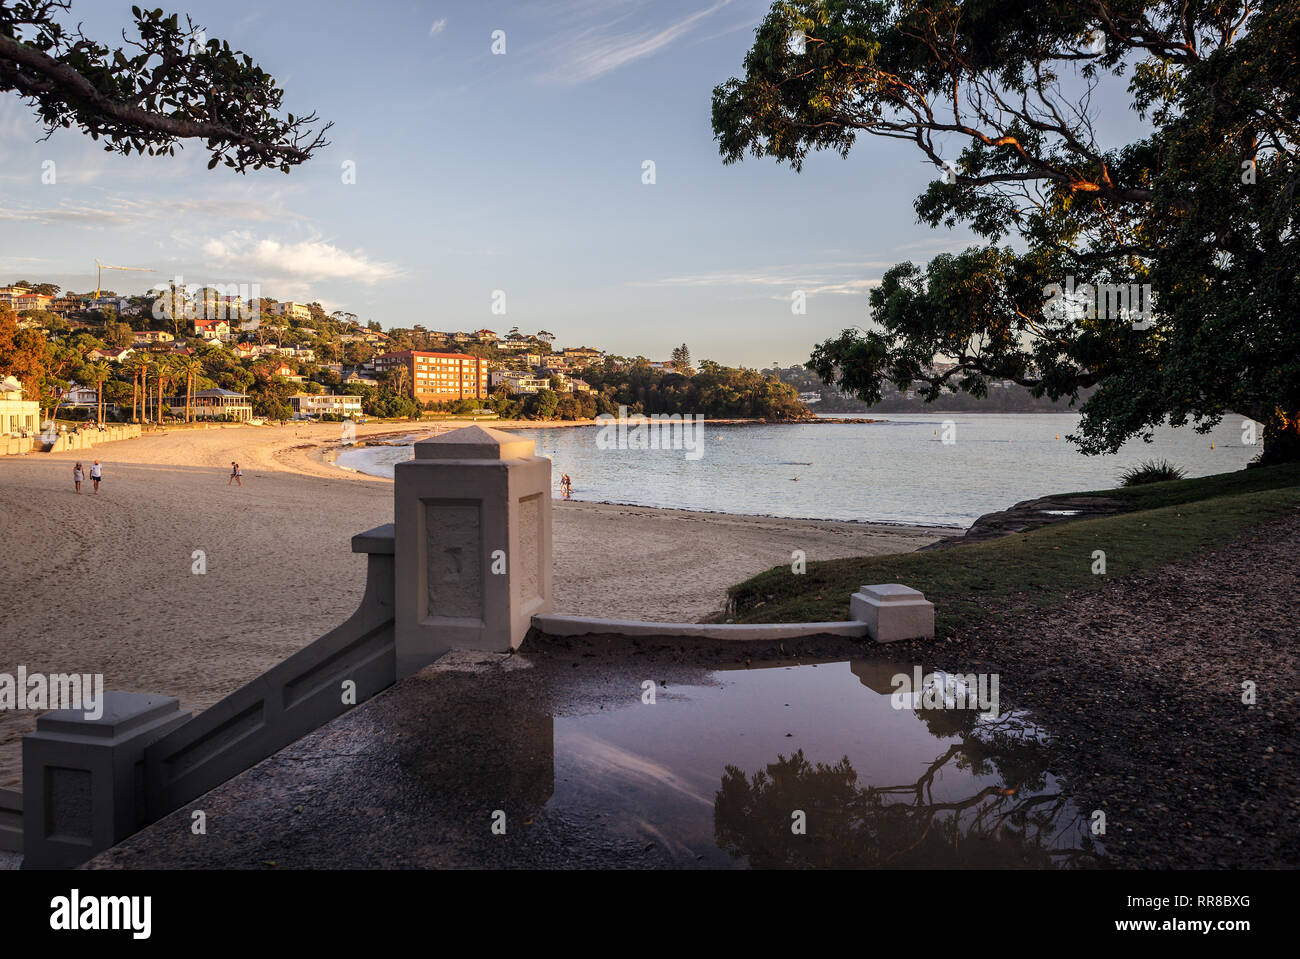 Balmoral Beach. The early morning sun and warmth of a summers morning brings so many people to the beach. A walk, swim or to meditate all enjoy! Stock Photo